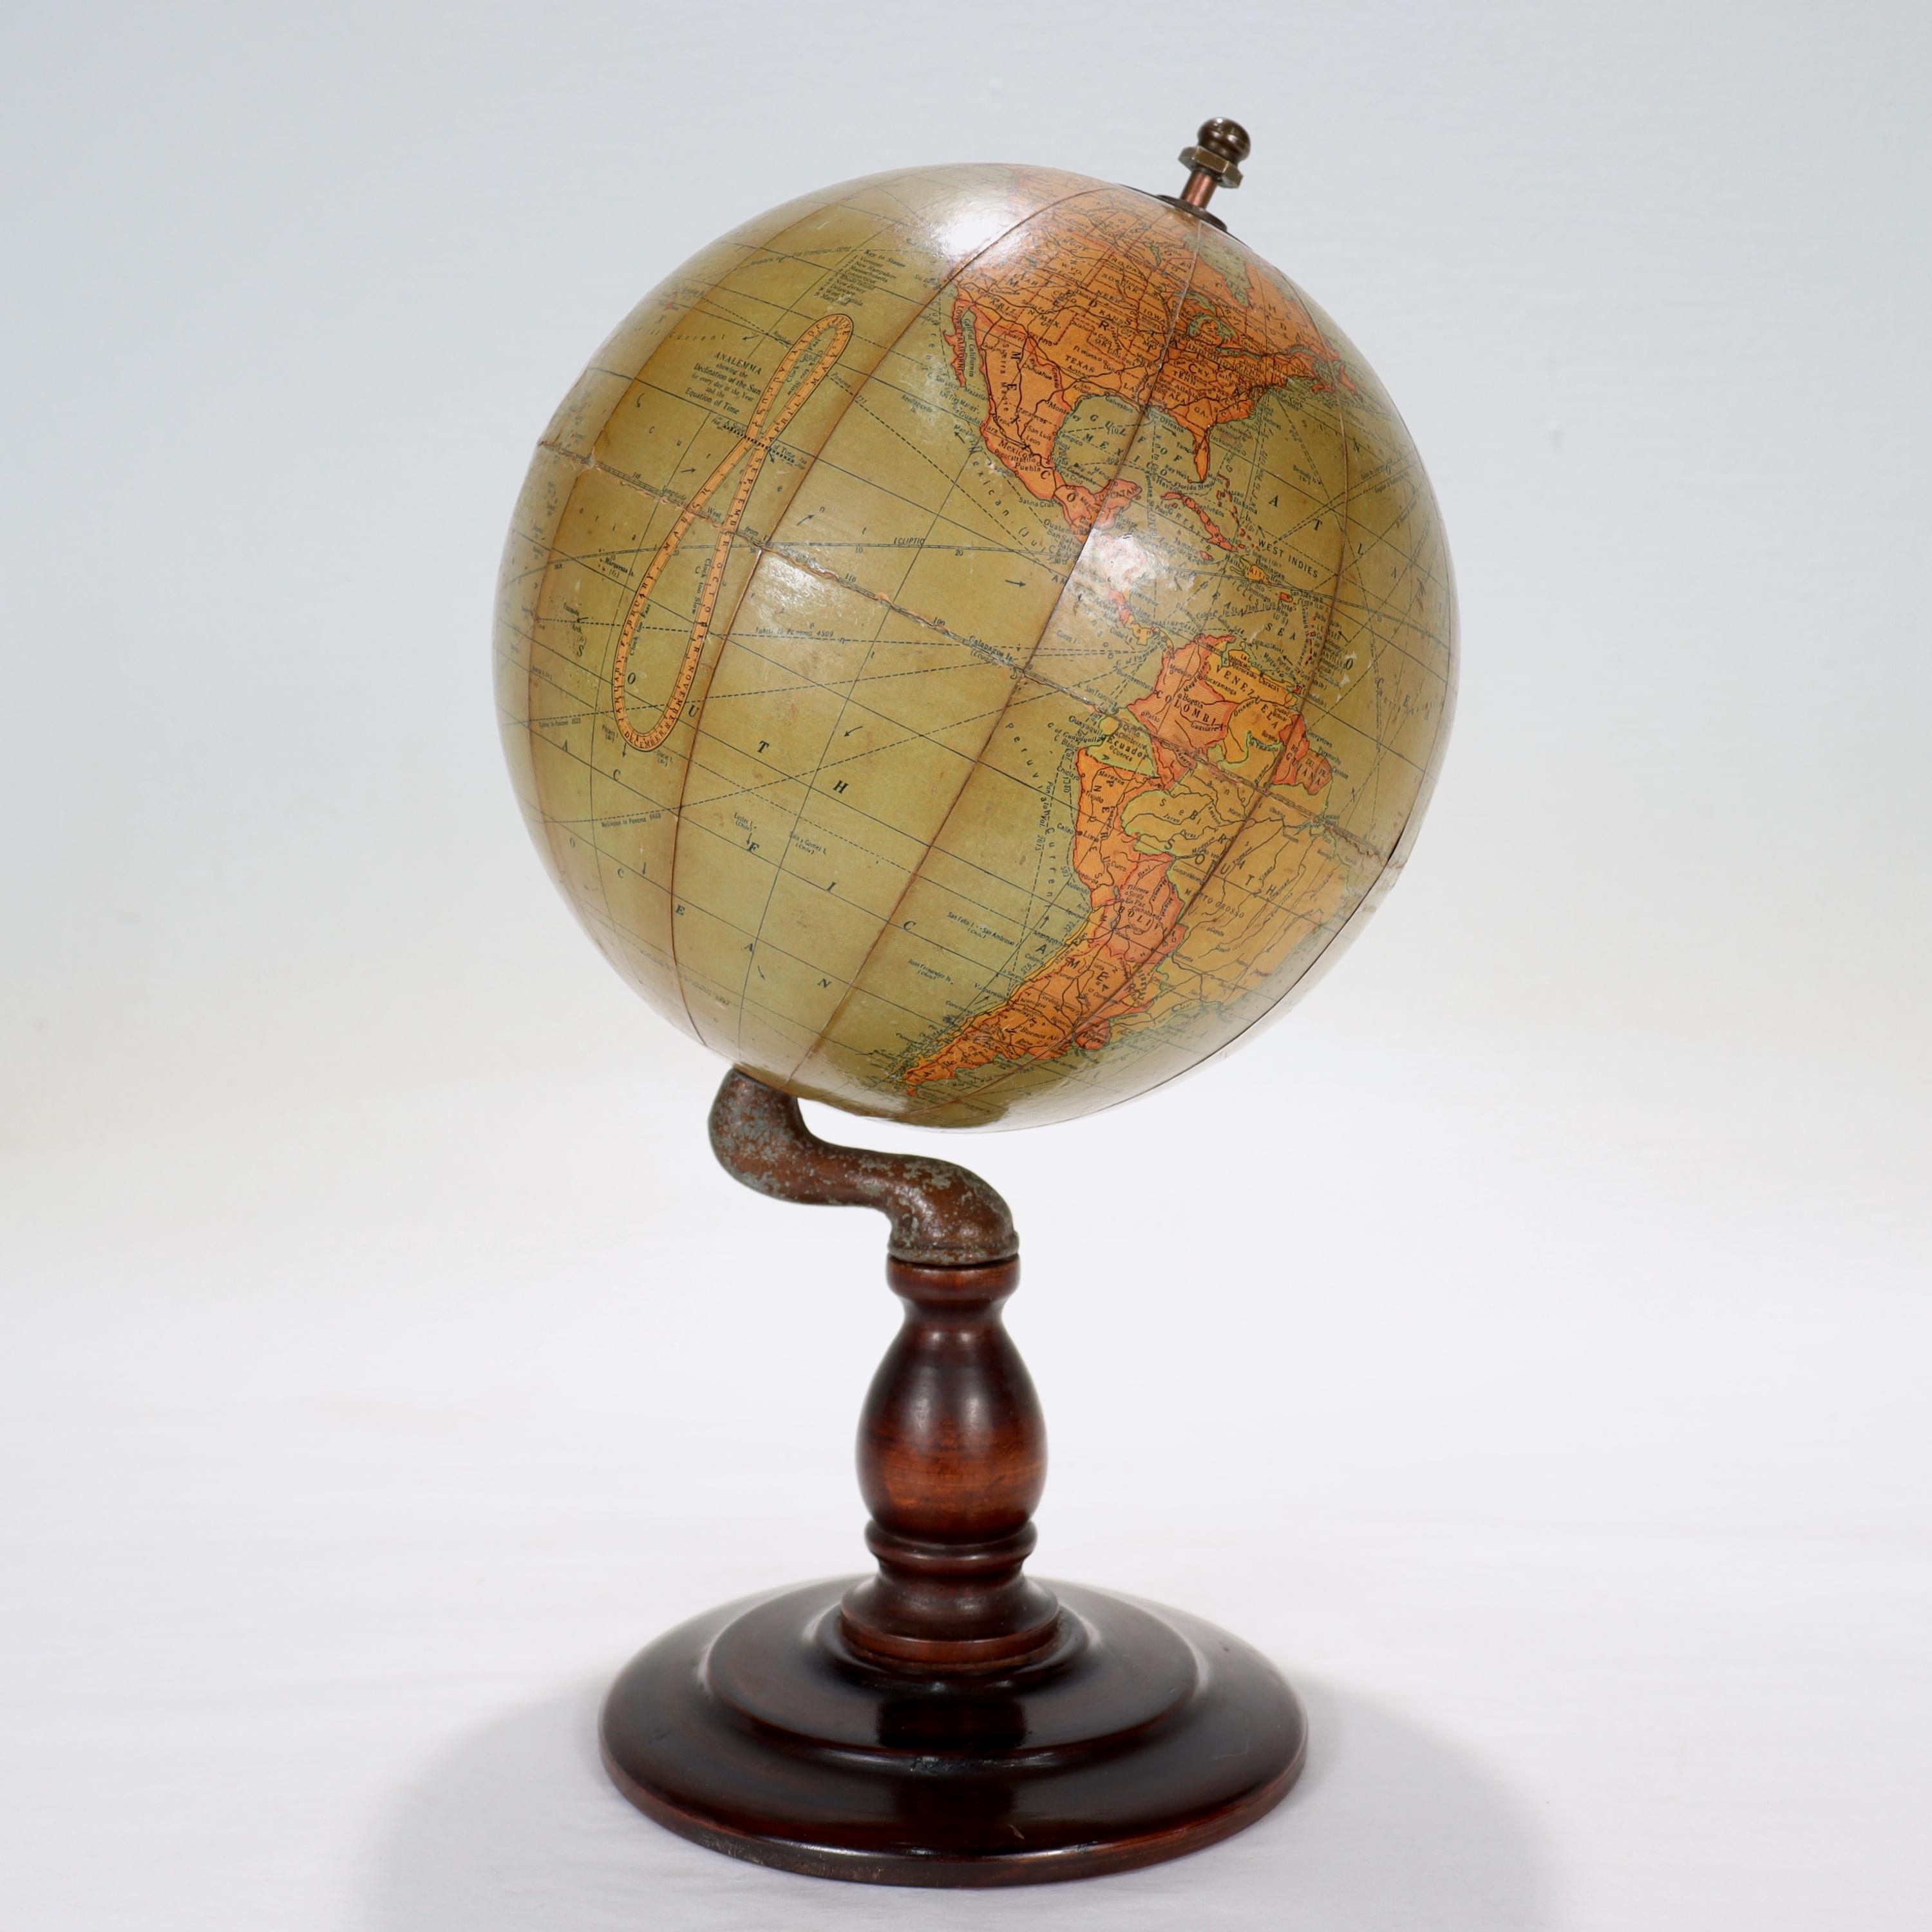 Offered here for your consideration is, A fine antique 6-inch terrestrial globe.
Additional Details:

By C.S. Hammond & Co.

The globe likely dates from 1927 to 1930 due to the marking of Leningrad (post-1924), Constantinople (pre-1930), and